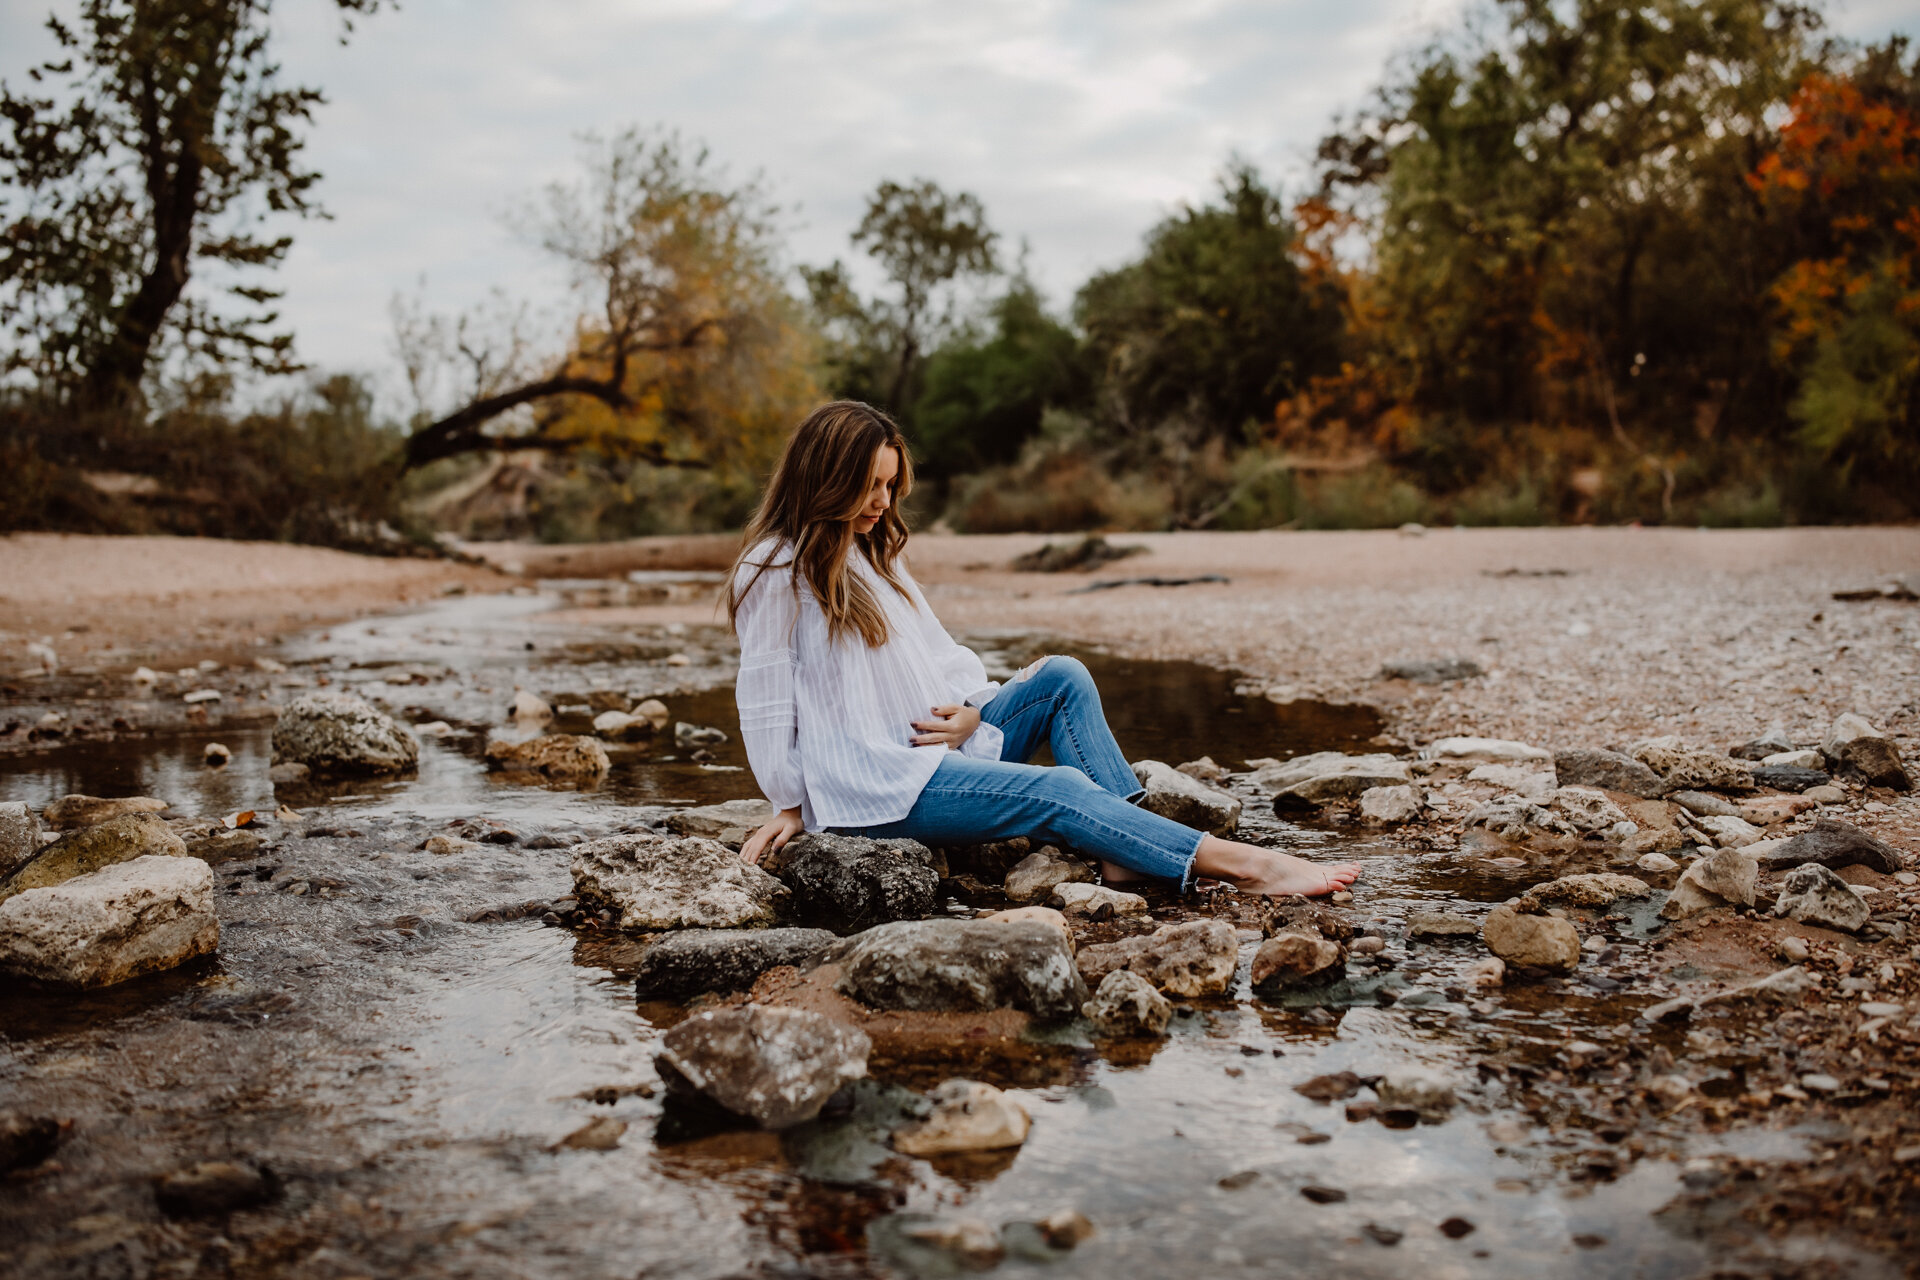 maternity session in austin